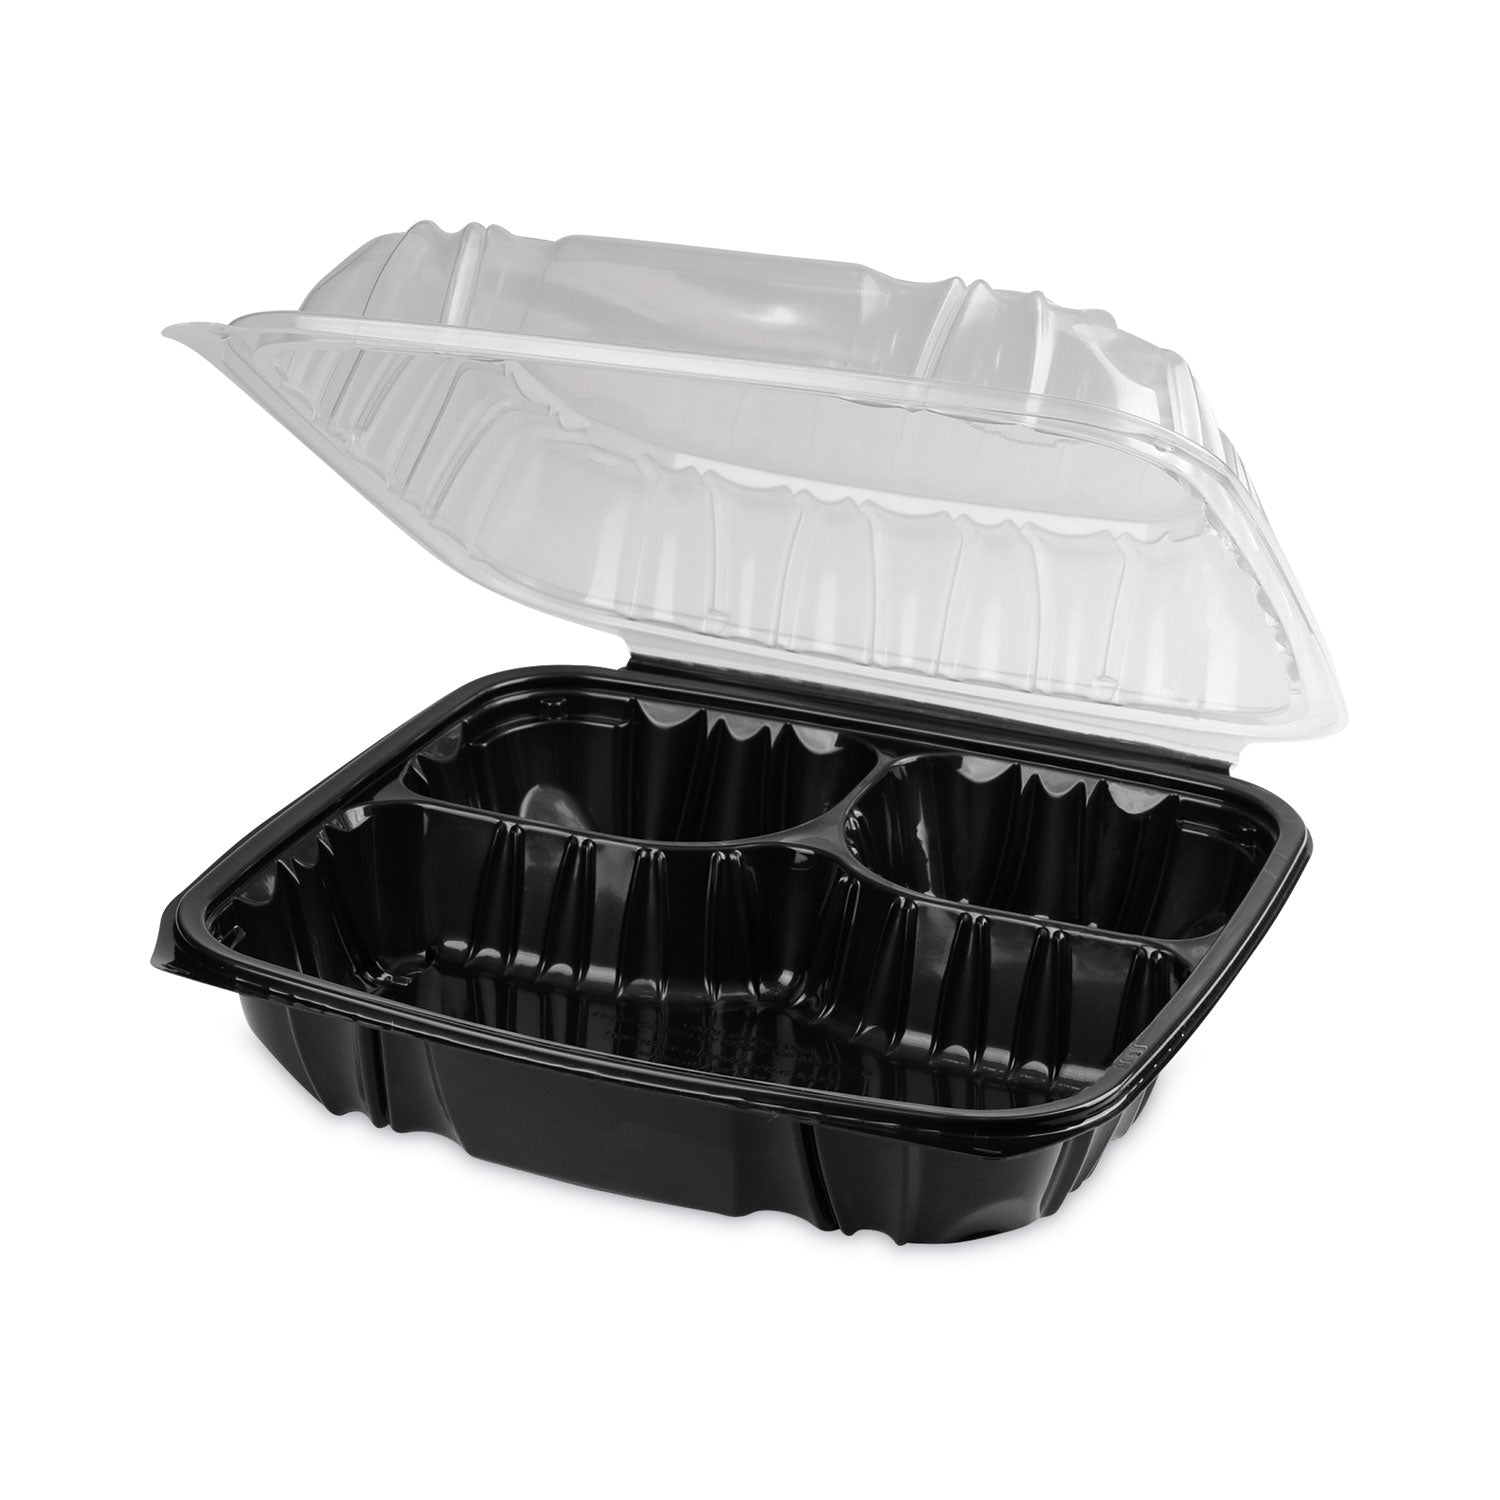 earthchoice-vented-dual-color-microwavable-hinged-lid-container-3-compartment-34oz-105x95x3-black-clear-plastic-132-ct_pctdc109310b000 - 4